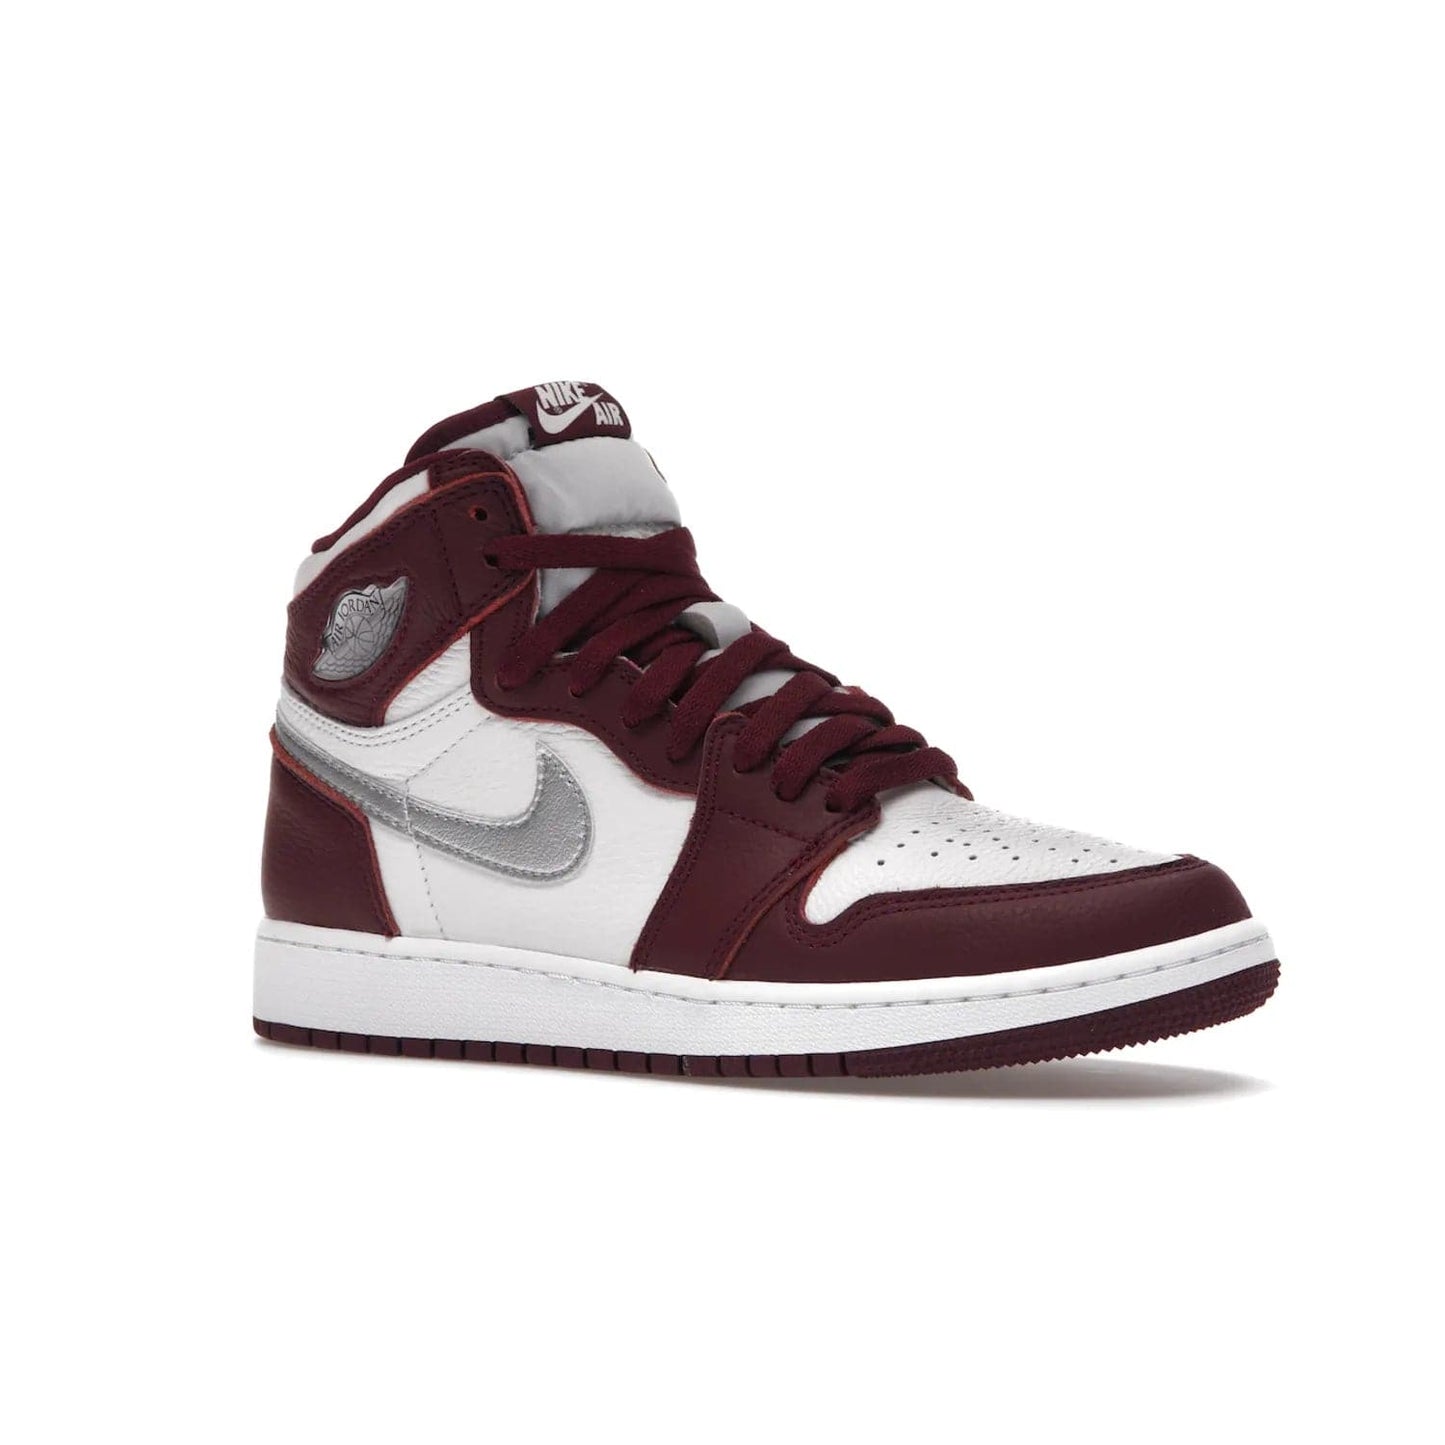 Jordan 1 Retro High OG Bordeaux (GS) - Image 4 - Only at www.BallersClubKickz.com - #
Introducing the Air Jordan 1 Retro High OG Bordeaux GS – a signature colorway part of the Jordan Brand Fall 2021 lineup. White leather upper & Bordeaux overlays, metallic silver swoosh, jeweled Air Jordan Wings logo & more. Step up your style game with this sleek fall season silhouette.